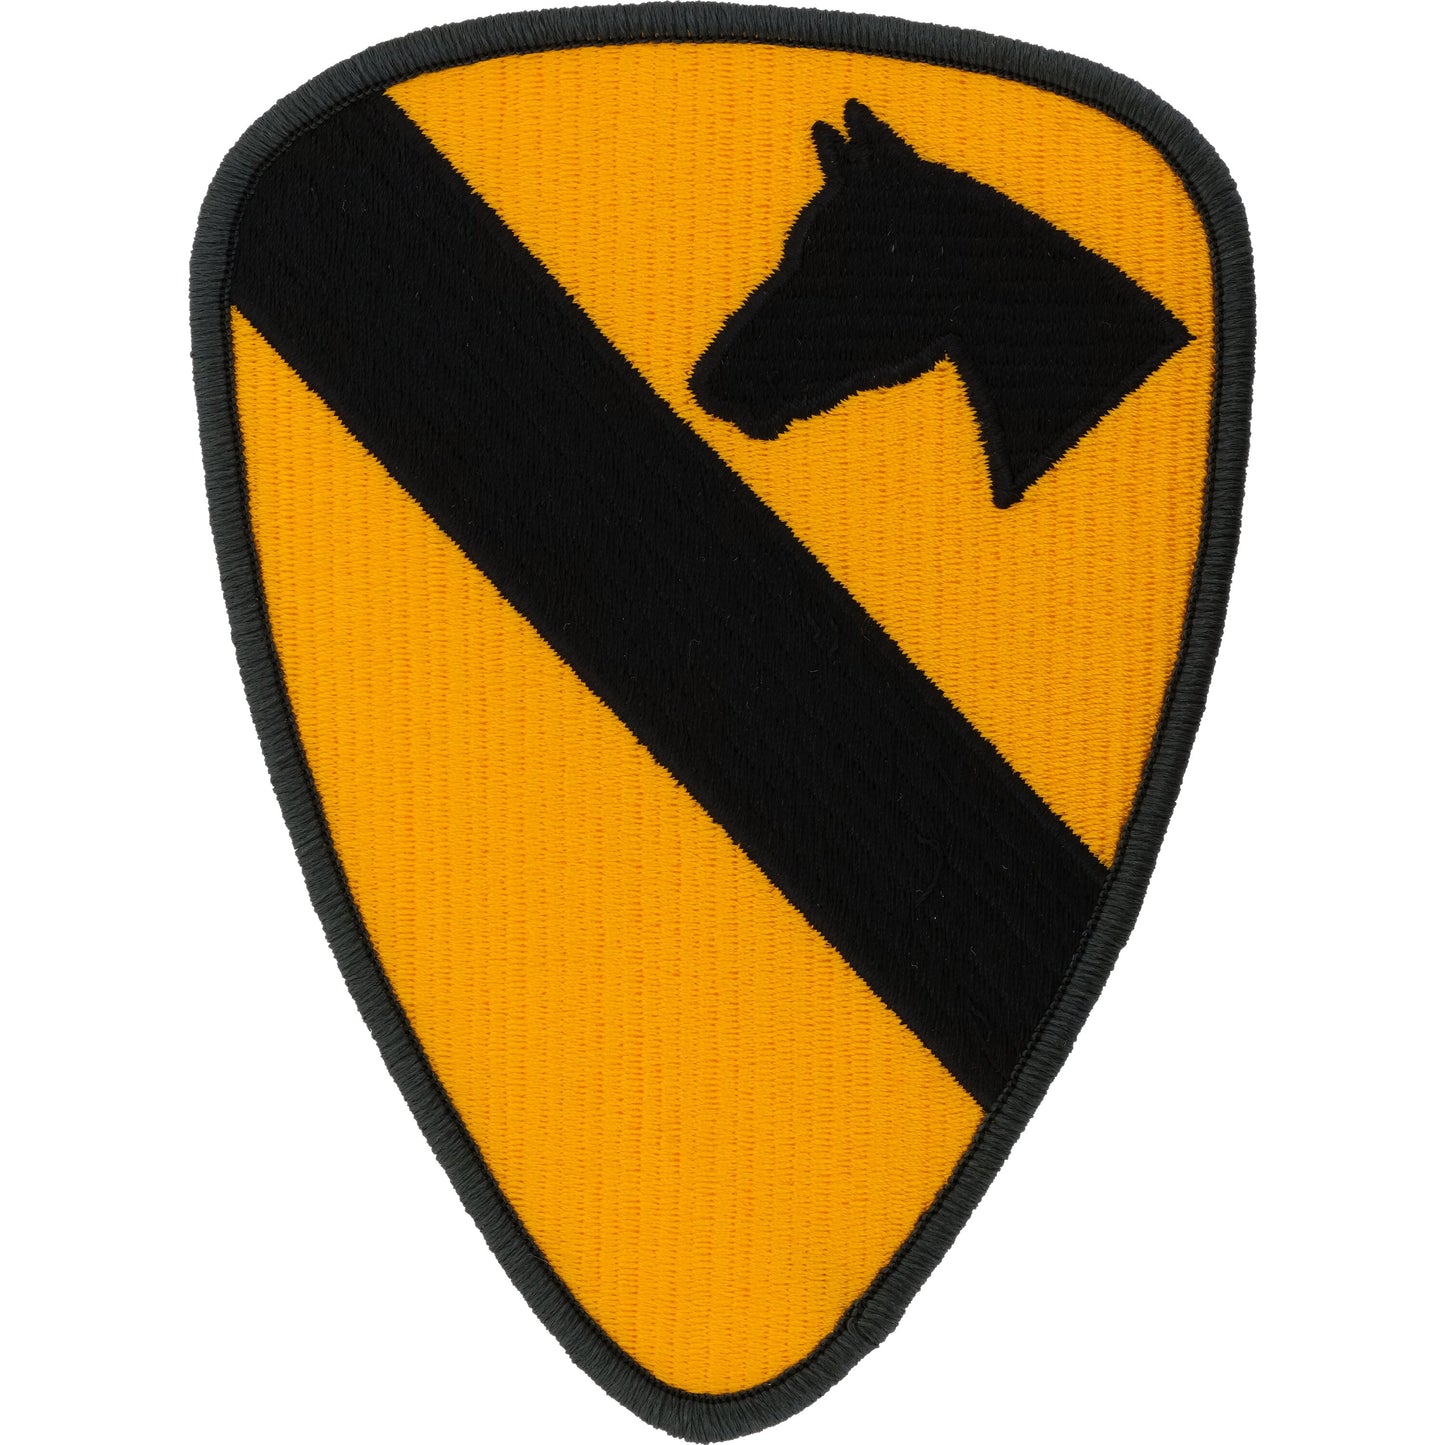 U.S Army 1st Cavalry Division Patch 5"